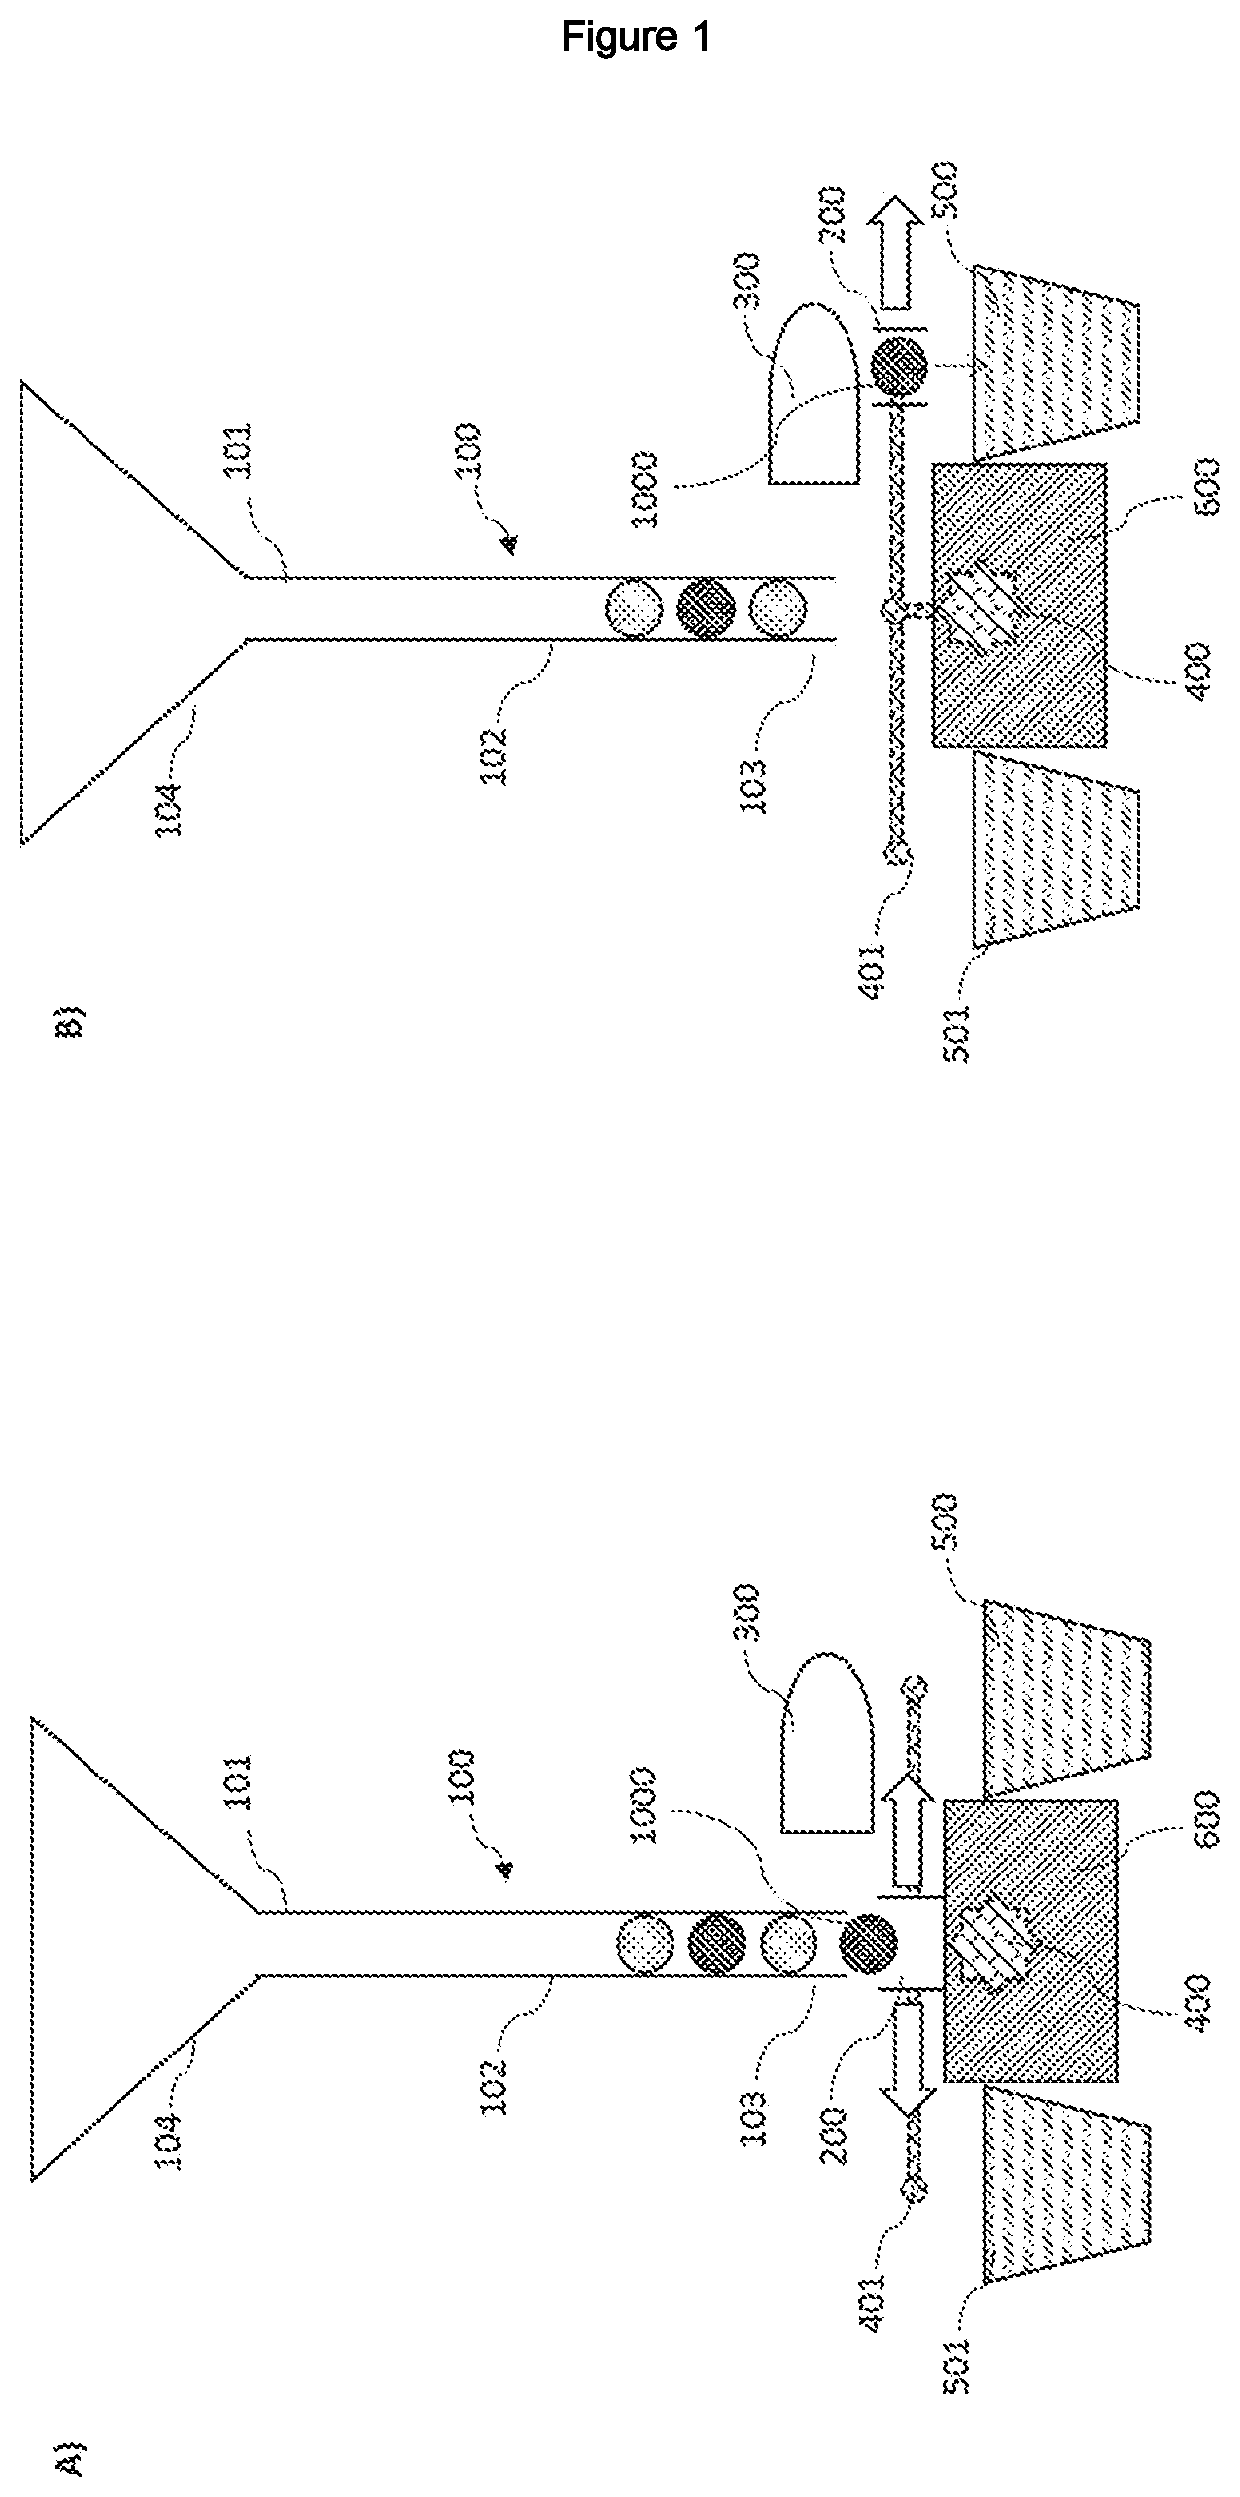 Device and Method for Sorting Biological Entities